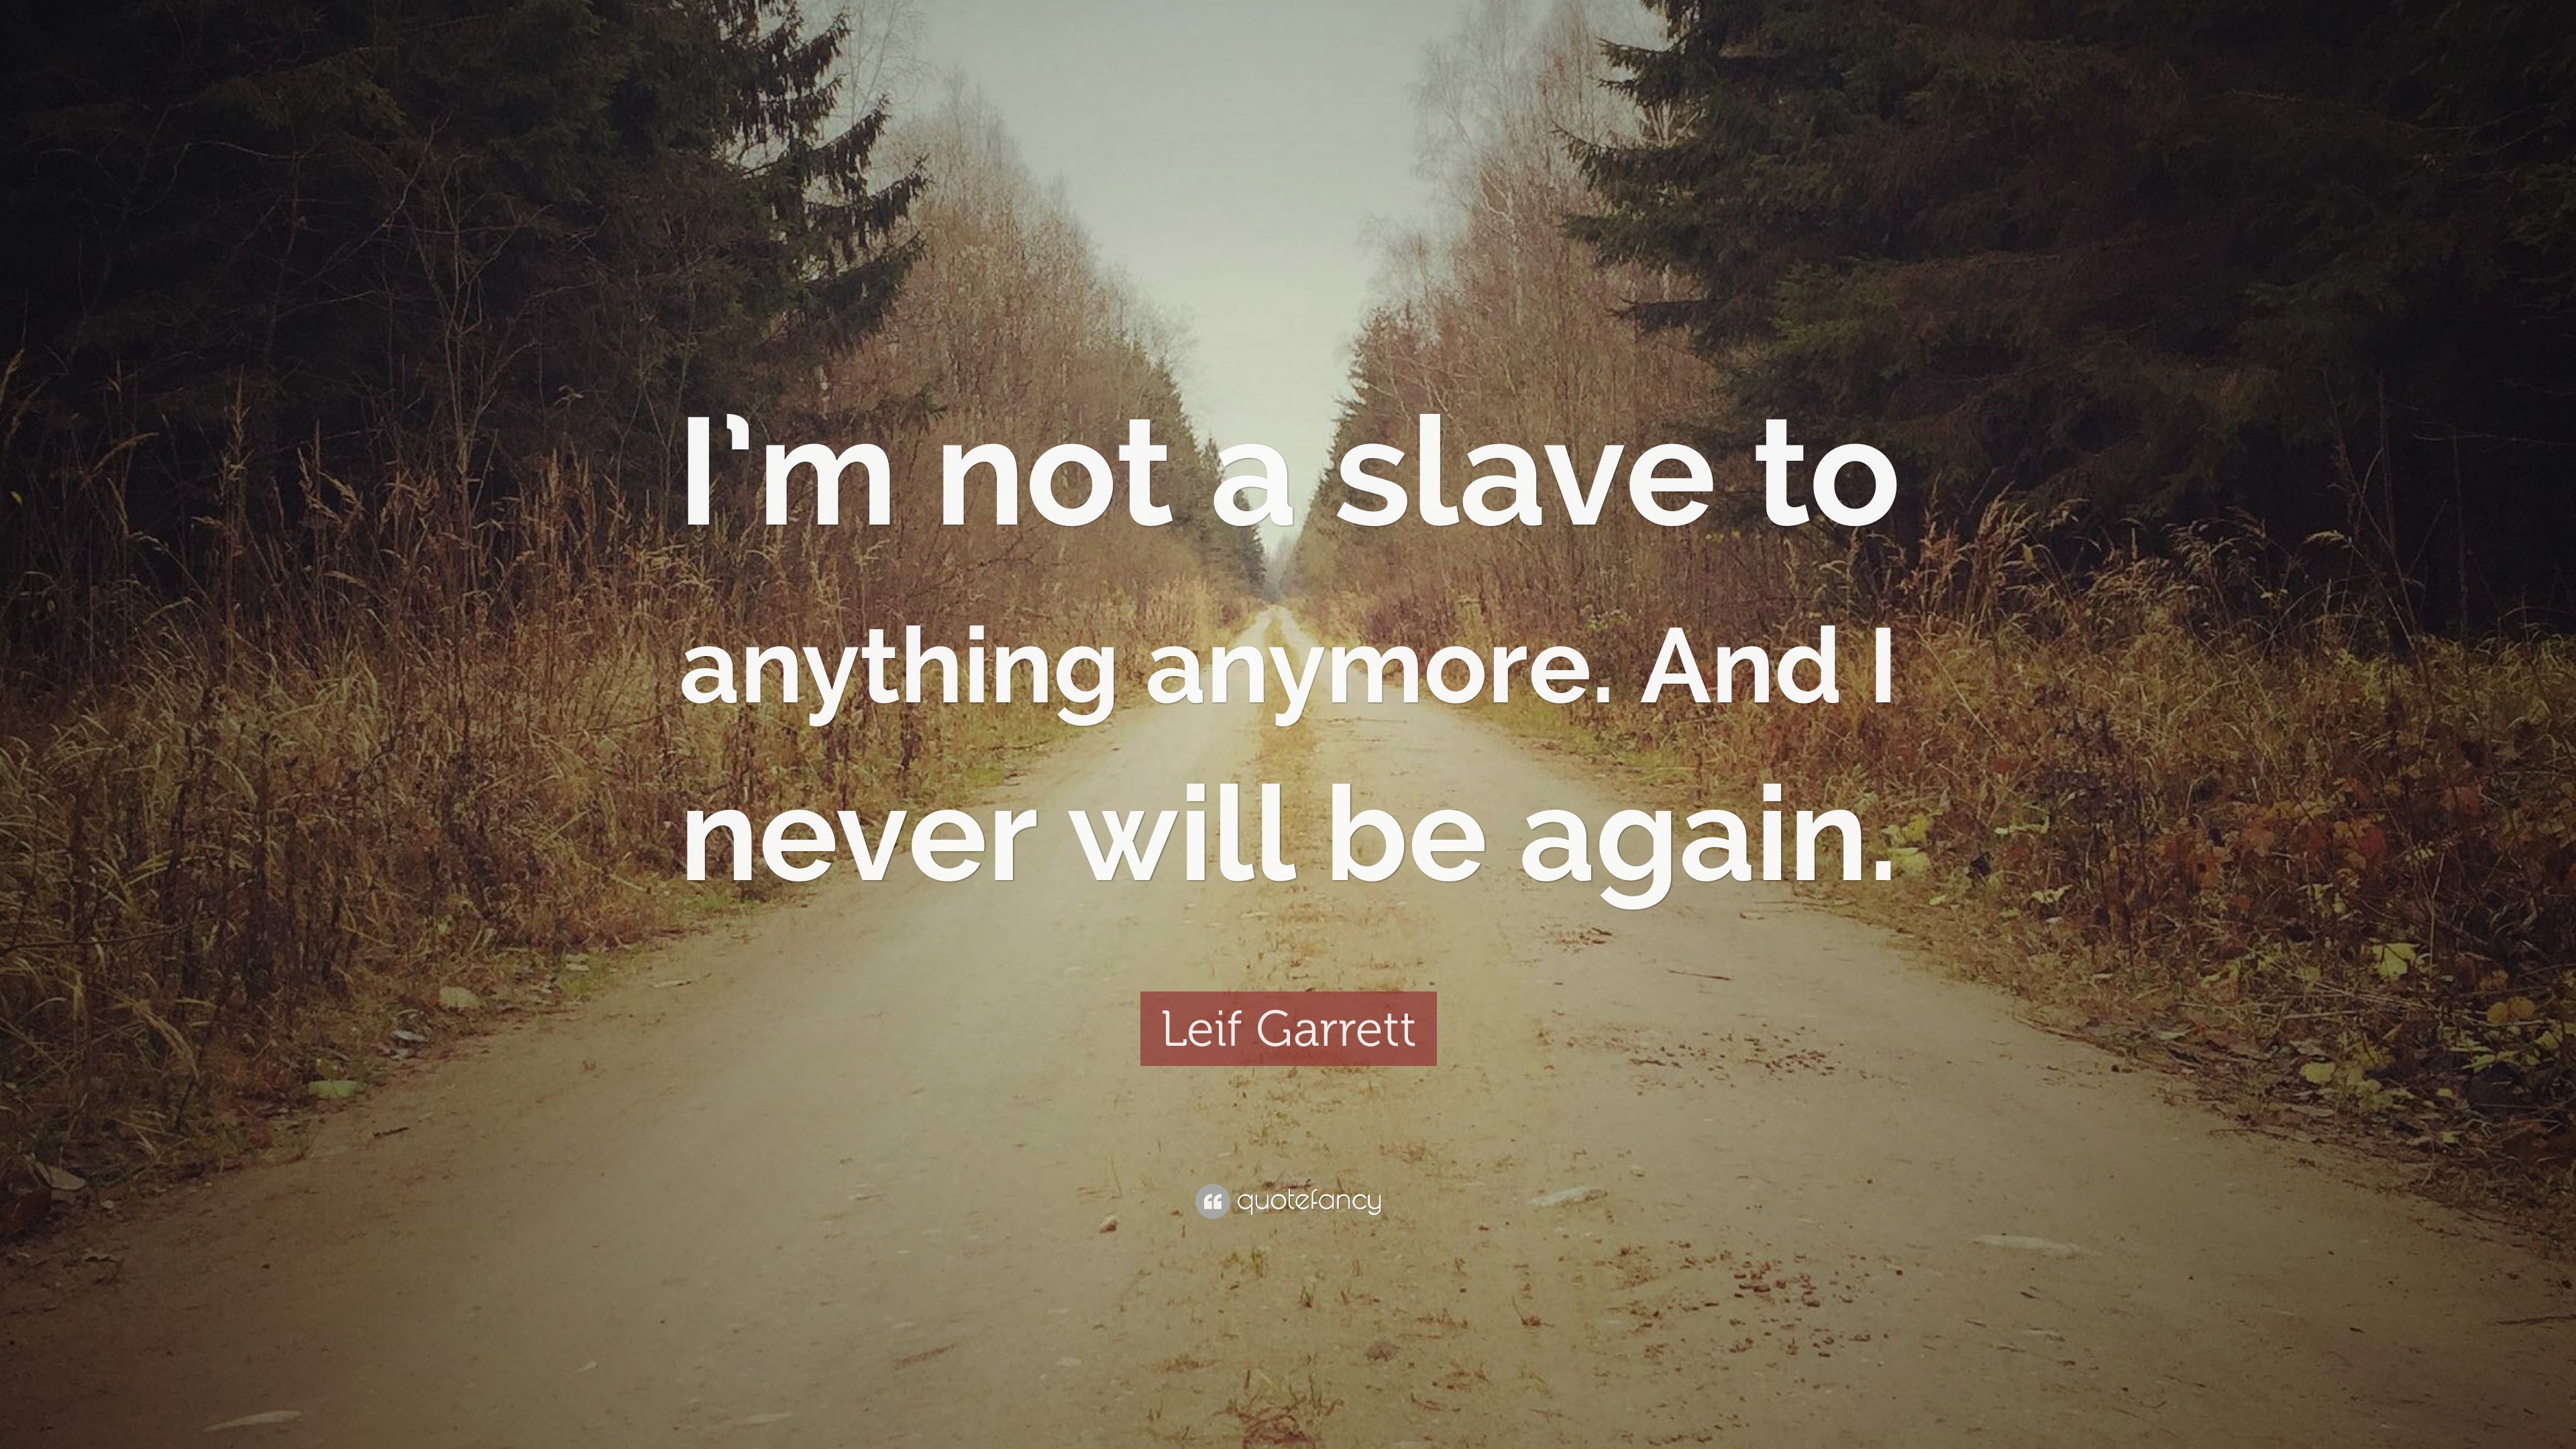 Leif Garrett Quote: “I’m not a slave to anything anymore. And I never ...